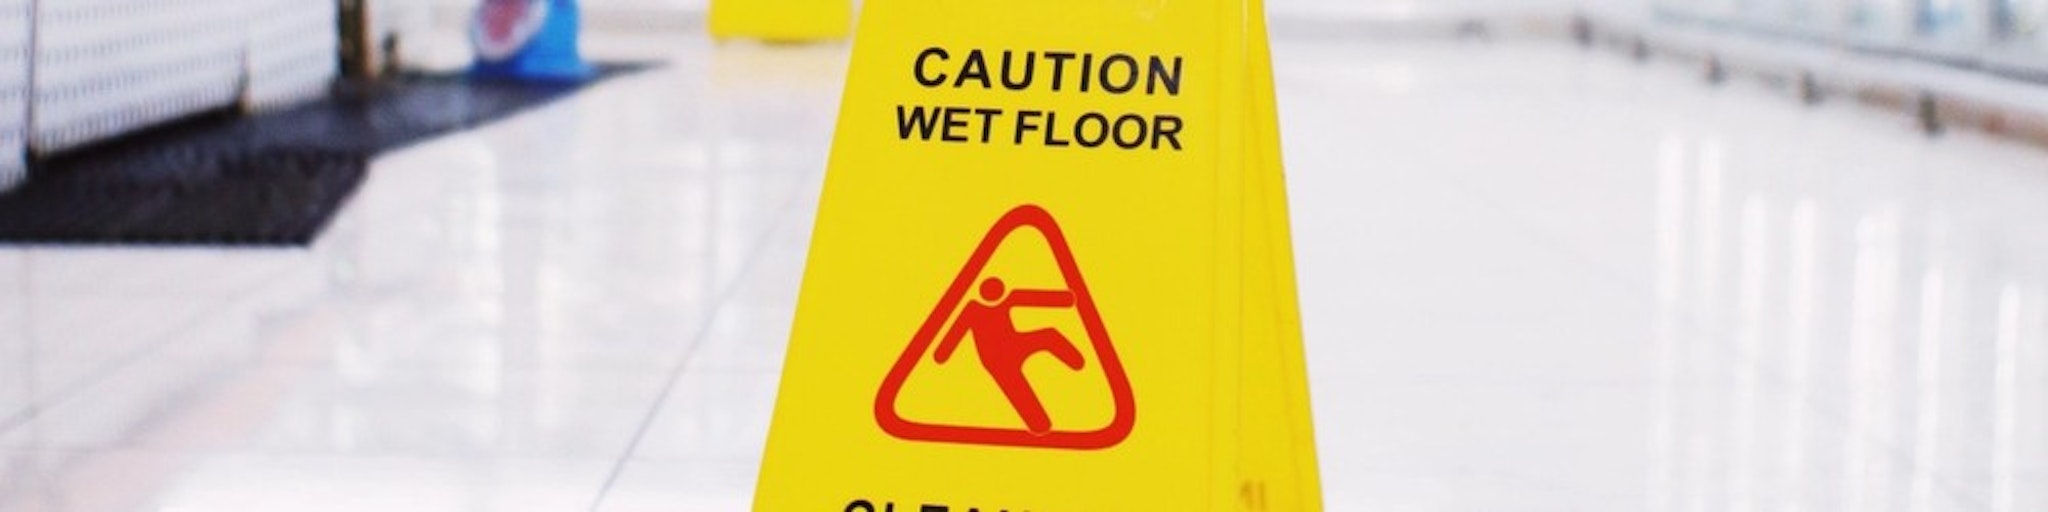 Cover Image for Slip and Fall Accidents: Do You Have a Claim?